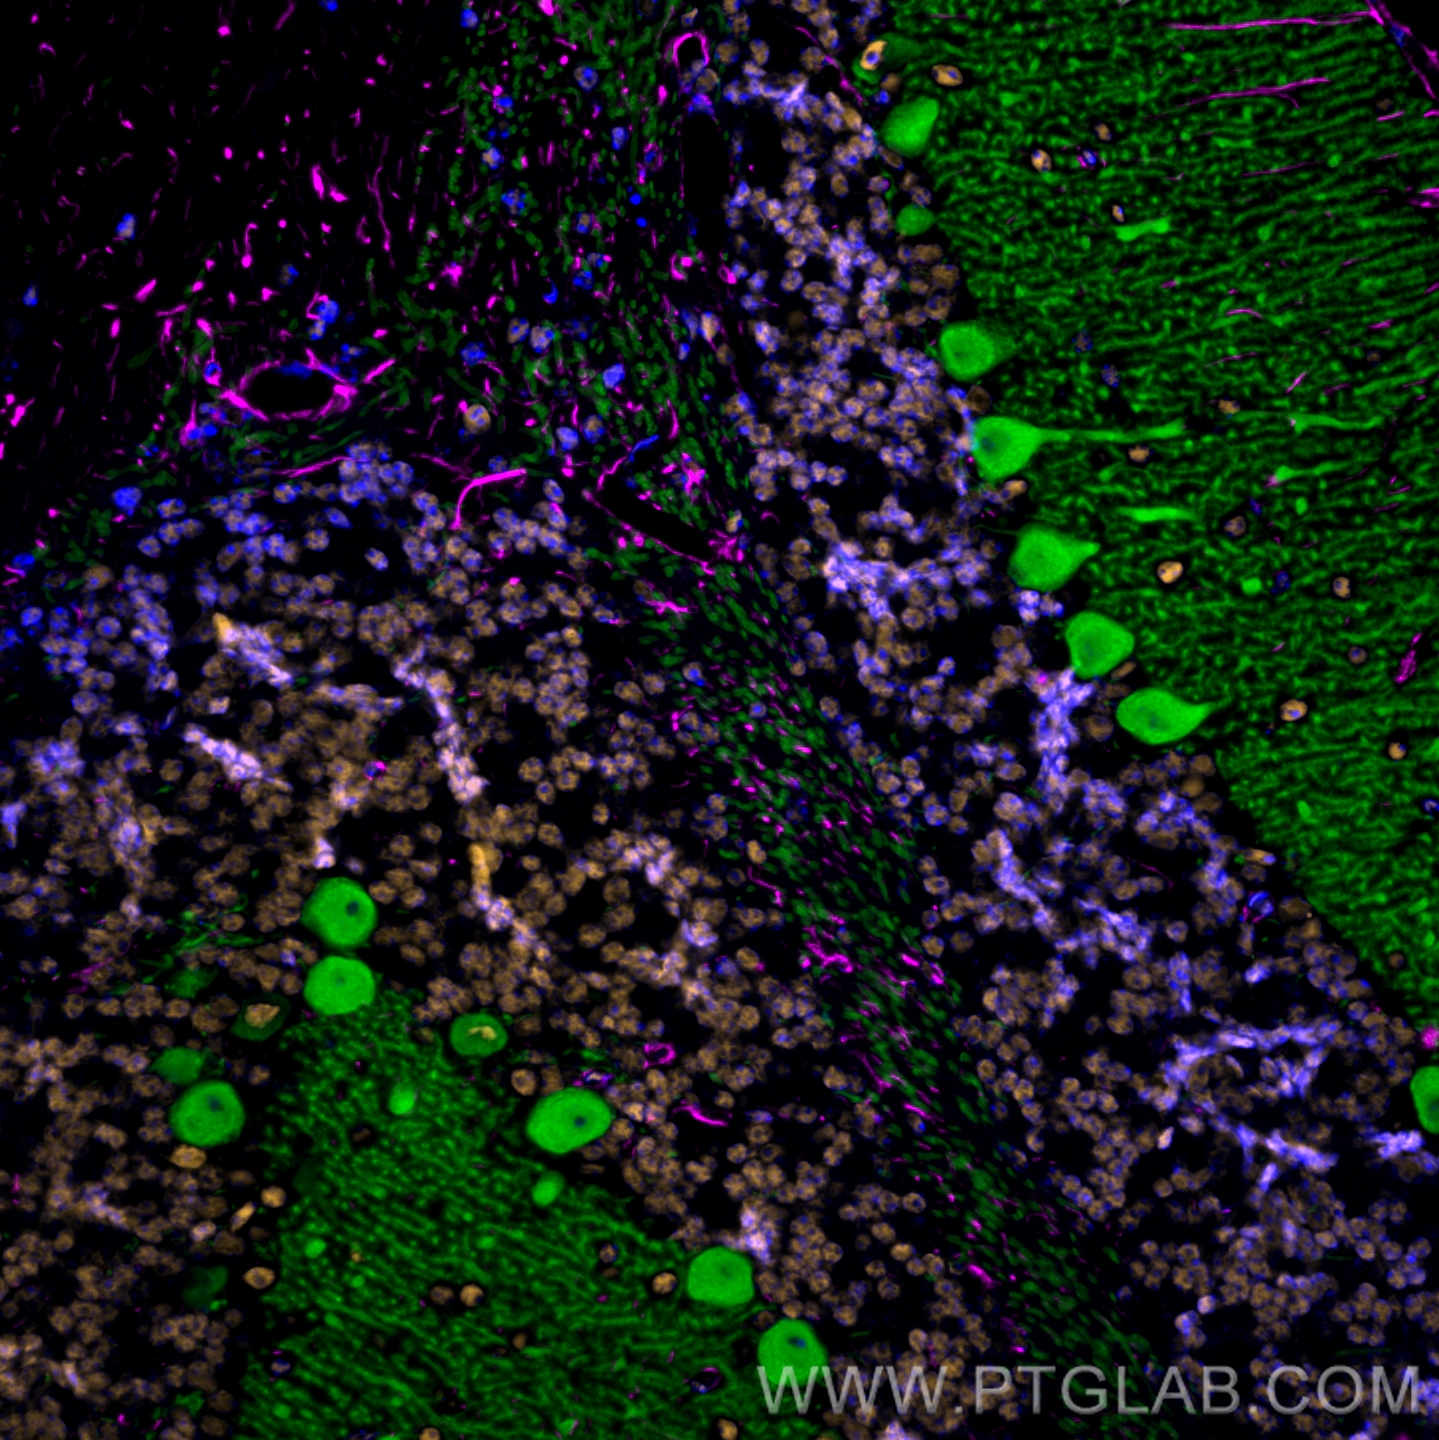 Immunofluorescence of mouse cerebellum: FFPE mouse cerebellum sections were stained with anti-Calbindin antibody (14479-1-AP, green) labeled with FlexAble HRP Antibody Labeling Kit for Rabbit IgG (KFA005) and Tyramide-488, anti-FUS antibody (68262-1-Ig, orange) labeled with FlexAble HRP Antibody Labeling Kit for Mouse IgG1 (KFA025) and Tyramide-555, and anti-GFAP antibody (60190-1-Ig, magenta) labeled with FlexAble HRP Antibody Labeling Kit for Mouse IgG2a (KFA045) and Tyramide-650. Cell nuclei are in blue.